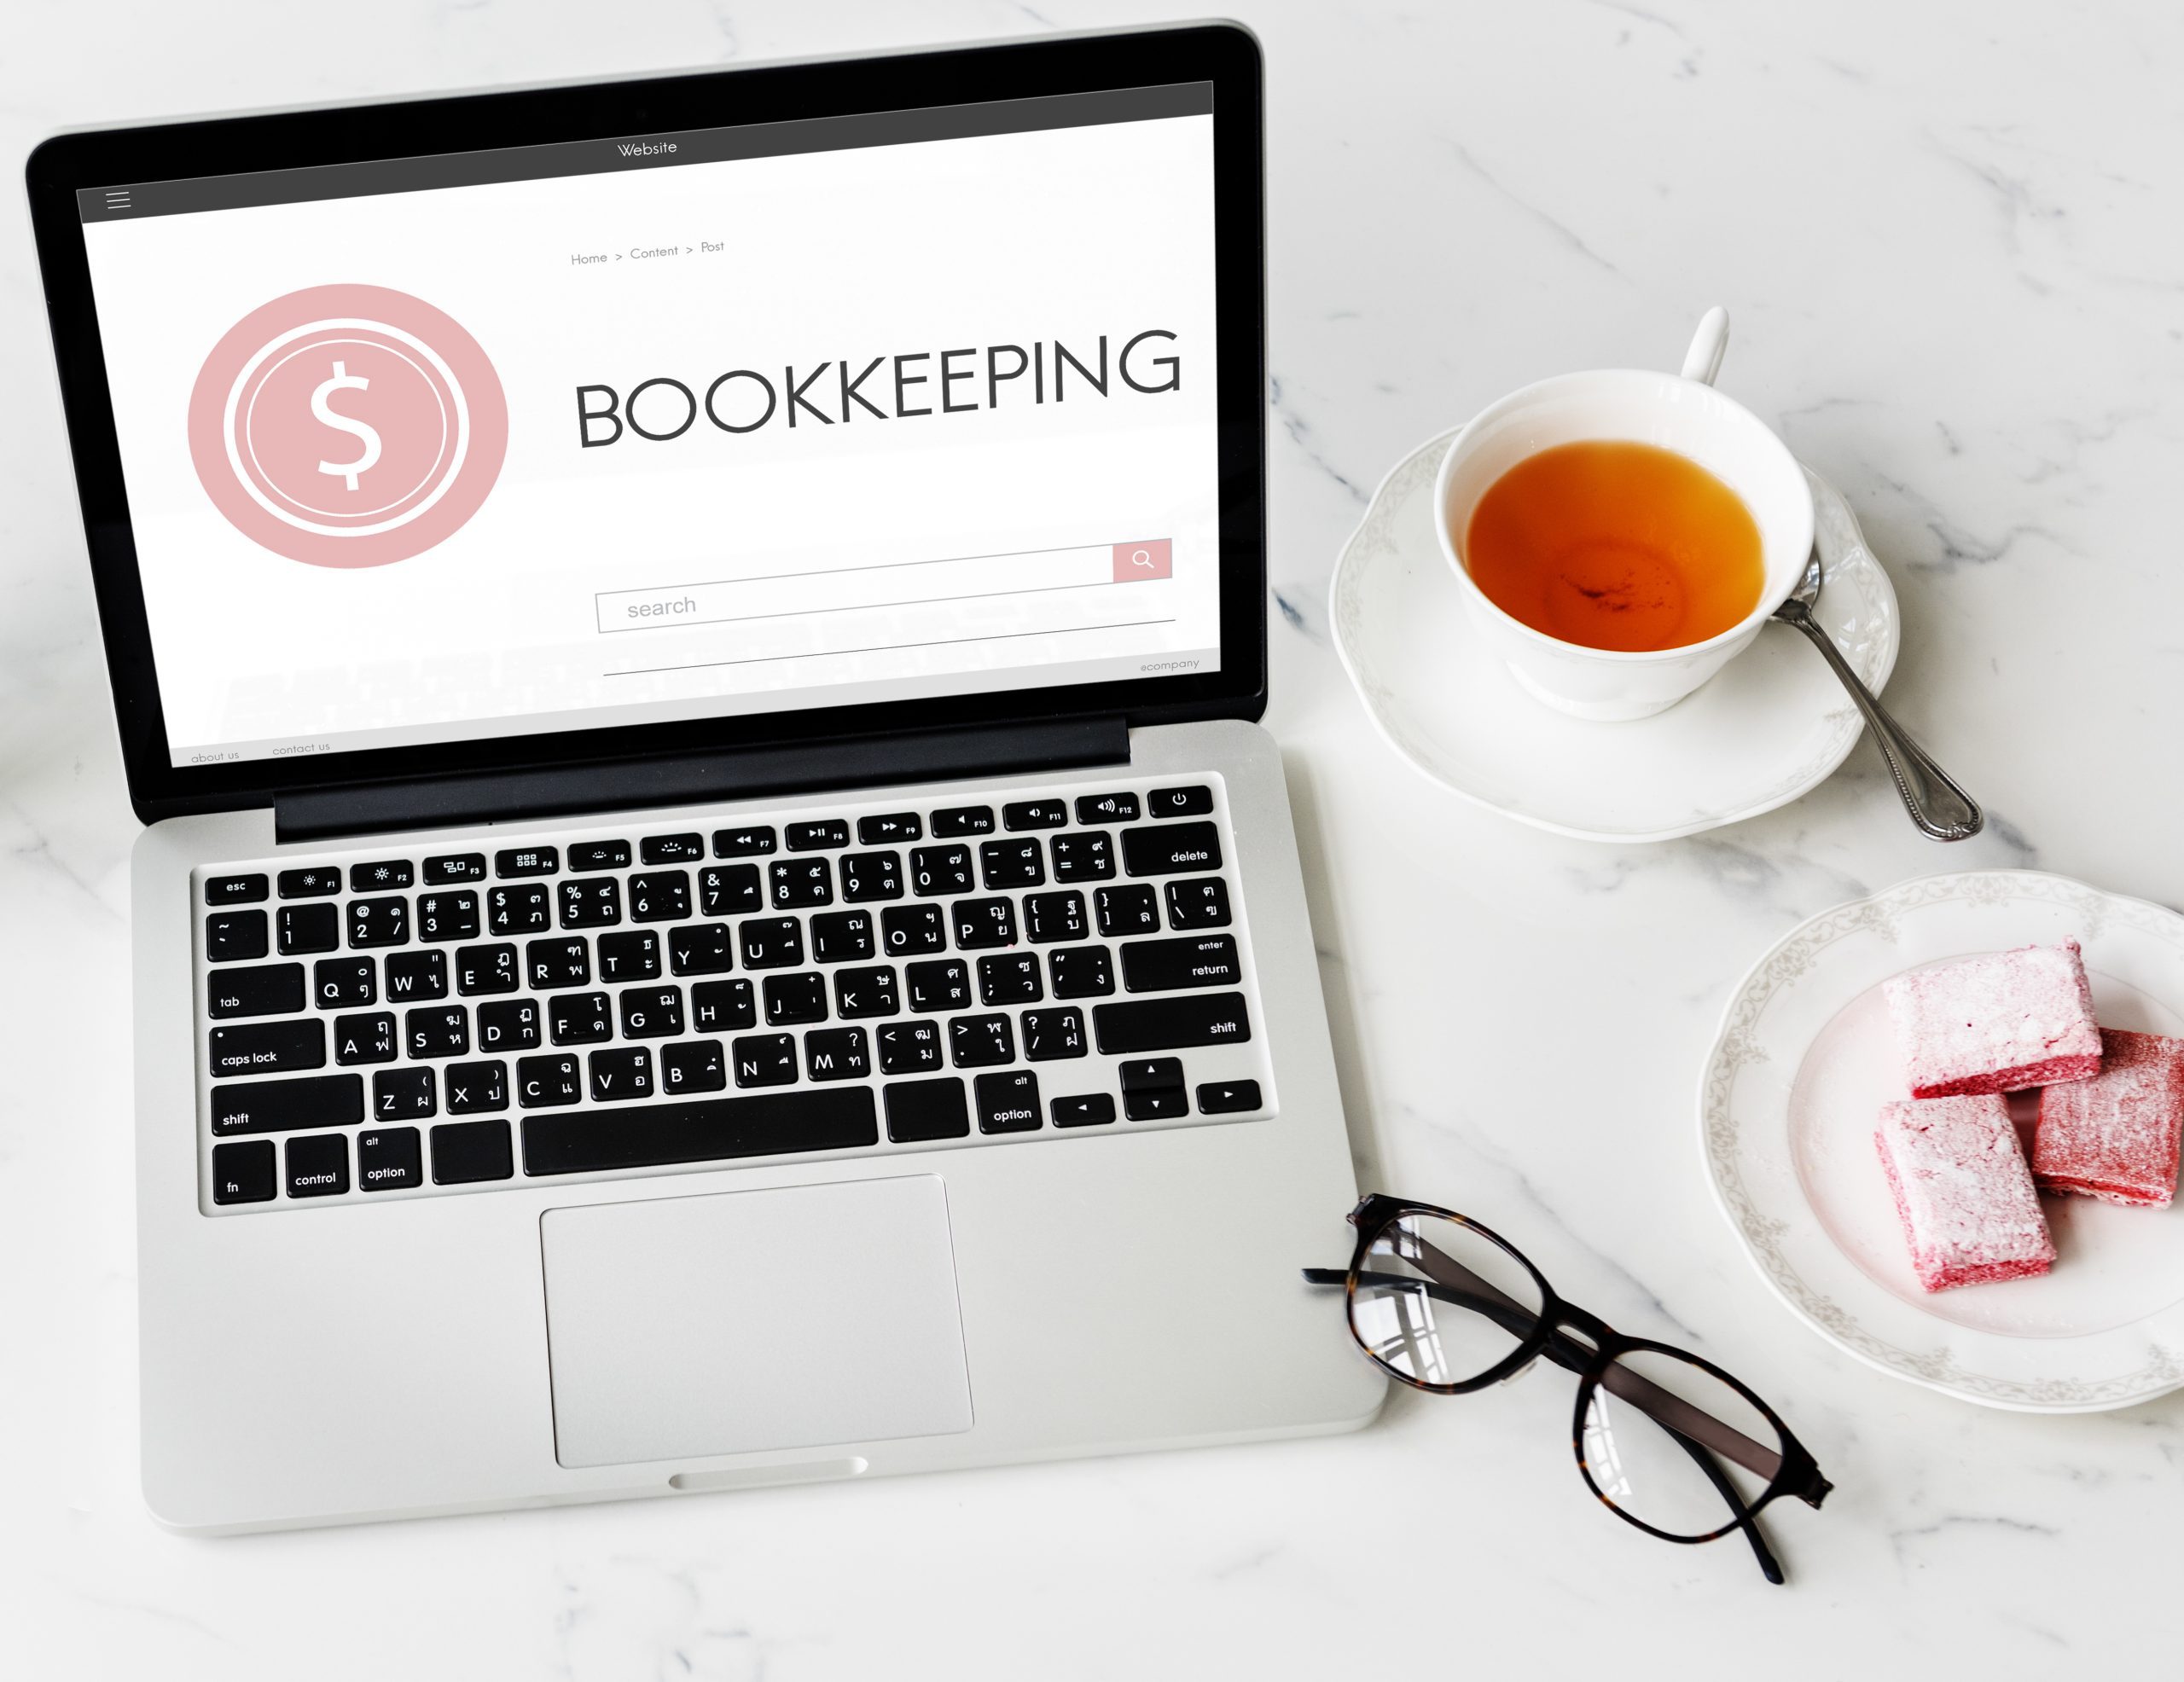 A photo that illustrates bookeeping services. In this article we explain how bookeeping companies can build high converting sales funnels and marketing strategies to get more leads and sell their services to more clients